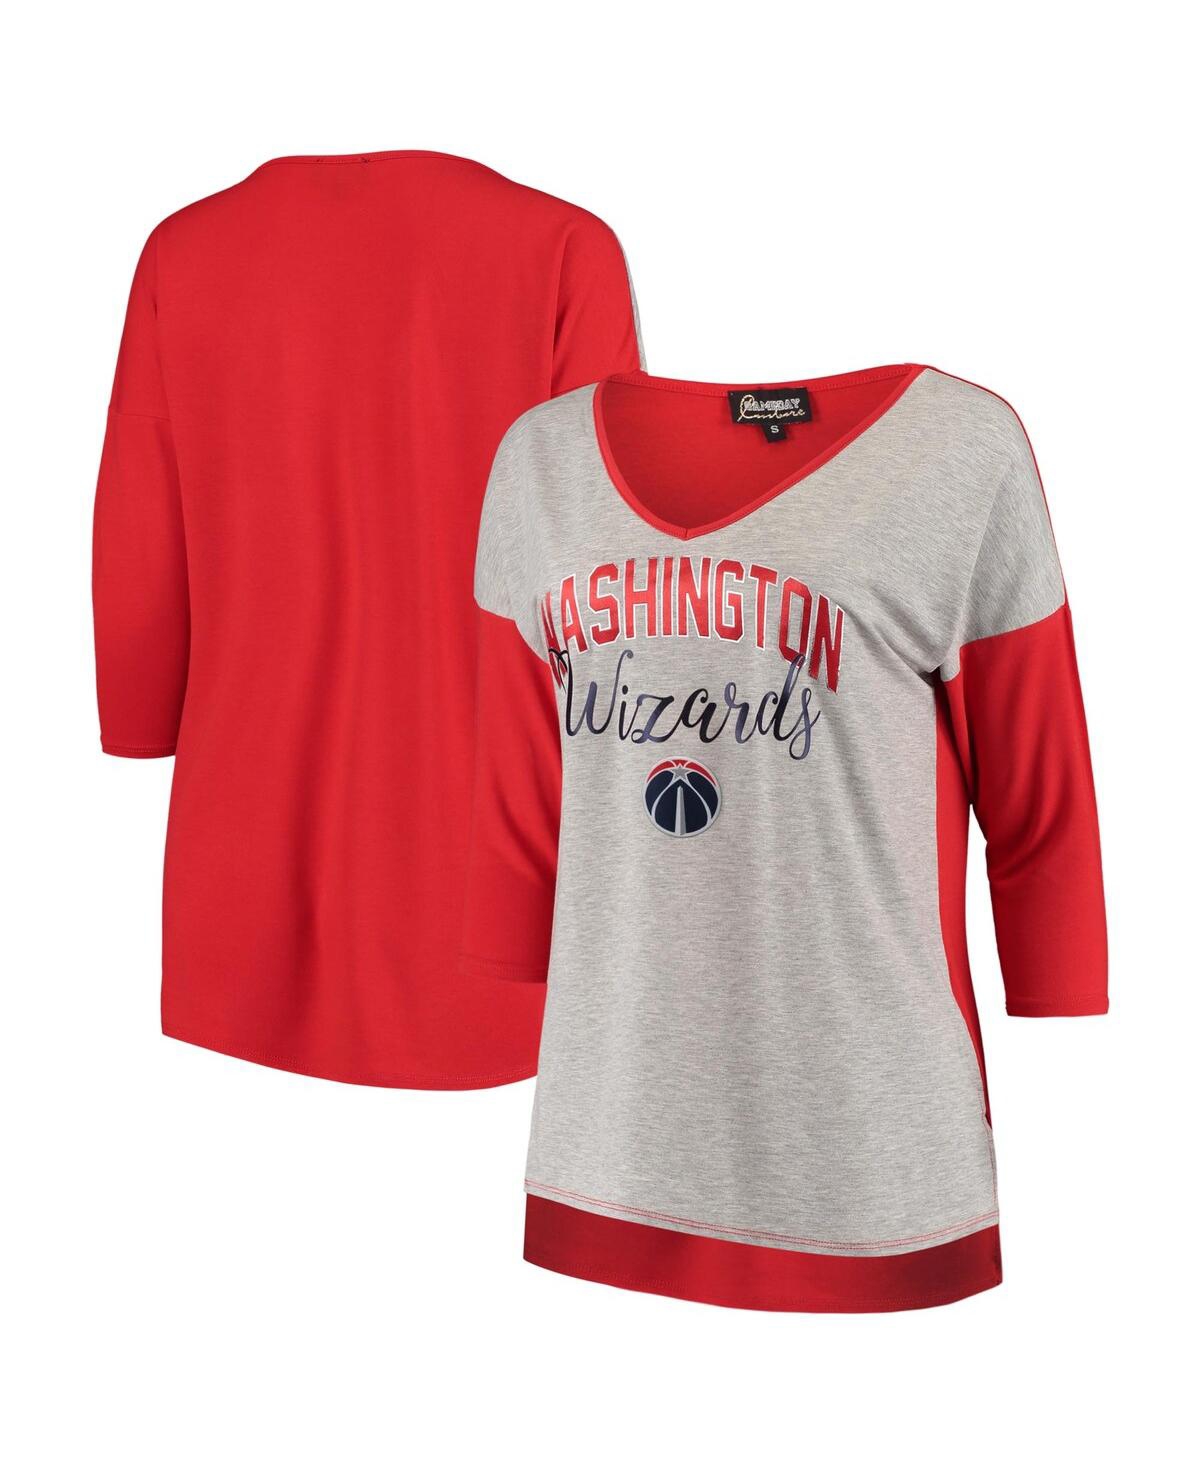 Shop Gameday Couture Women's Heathered Gray Washington Wizards In It To Win It V-neck 3/4-sleeve T-shirt